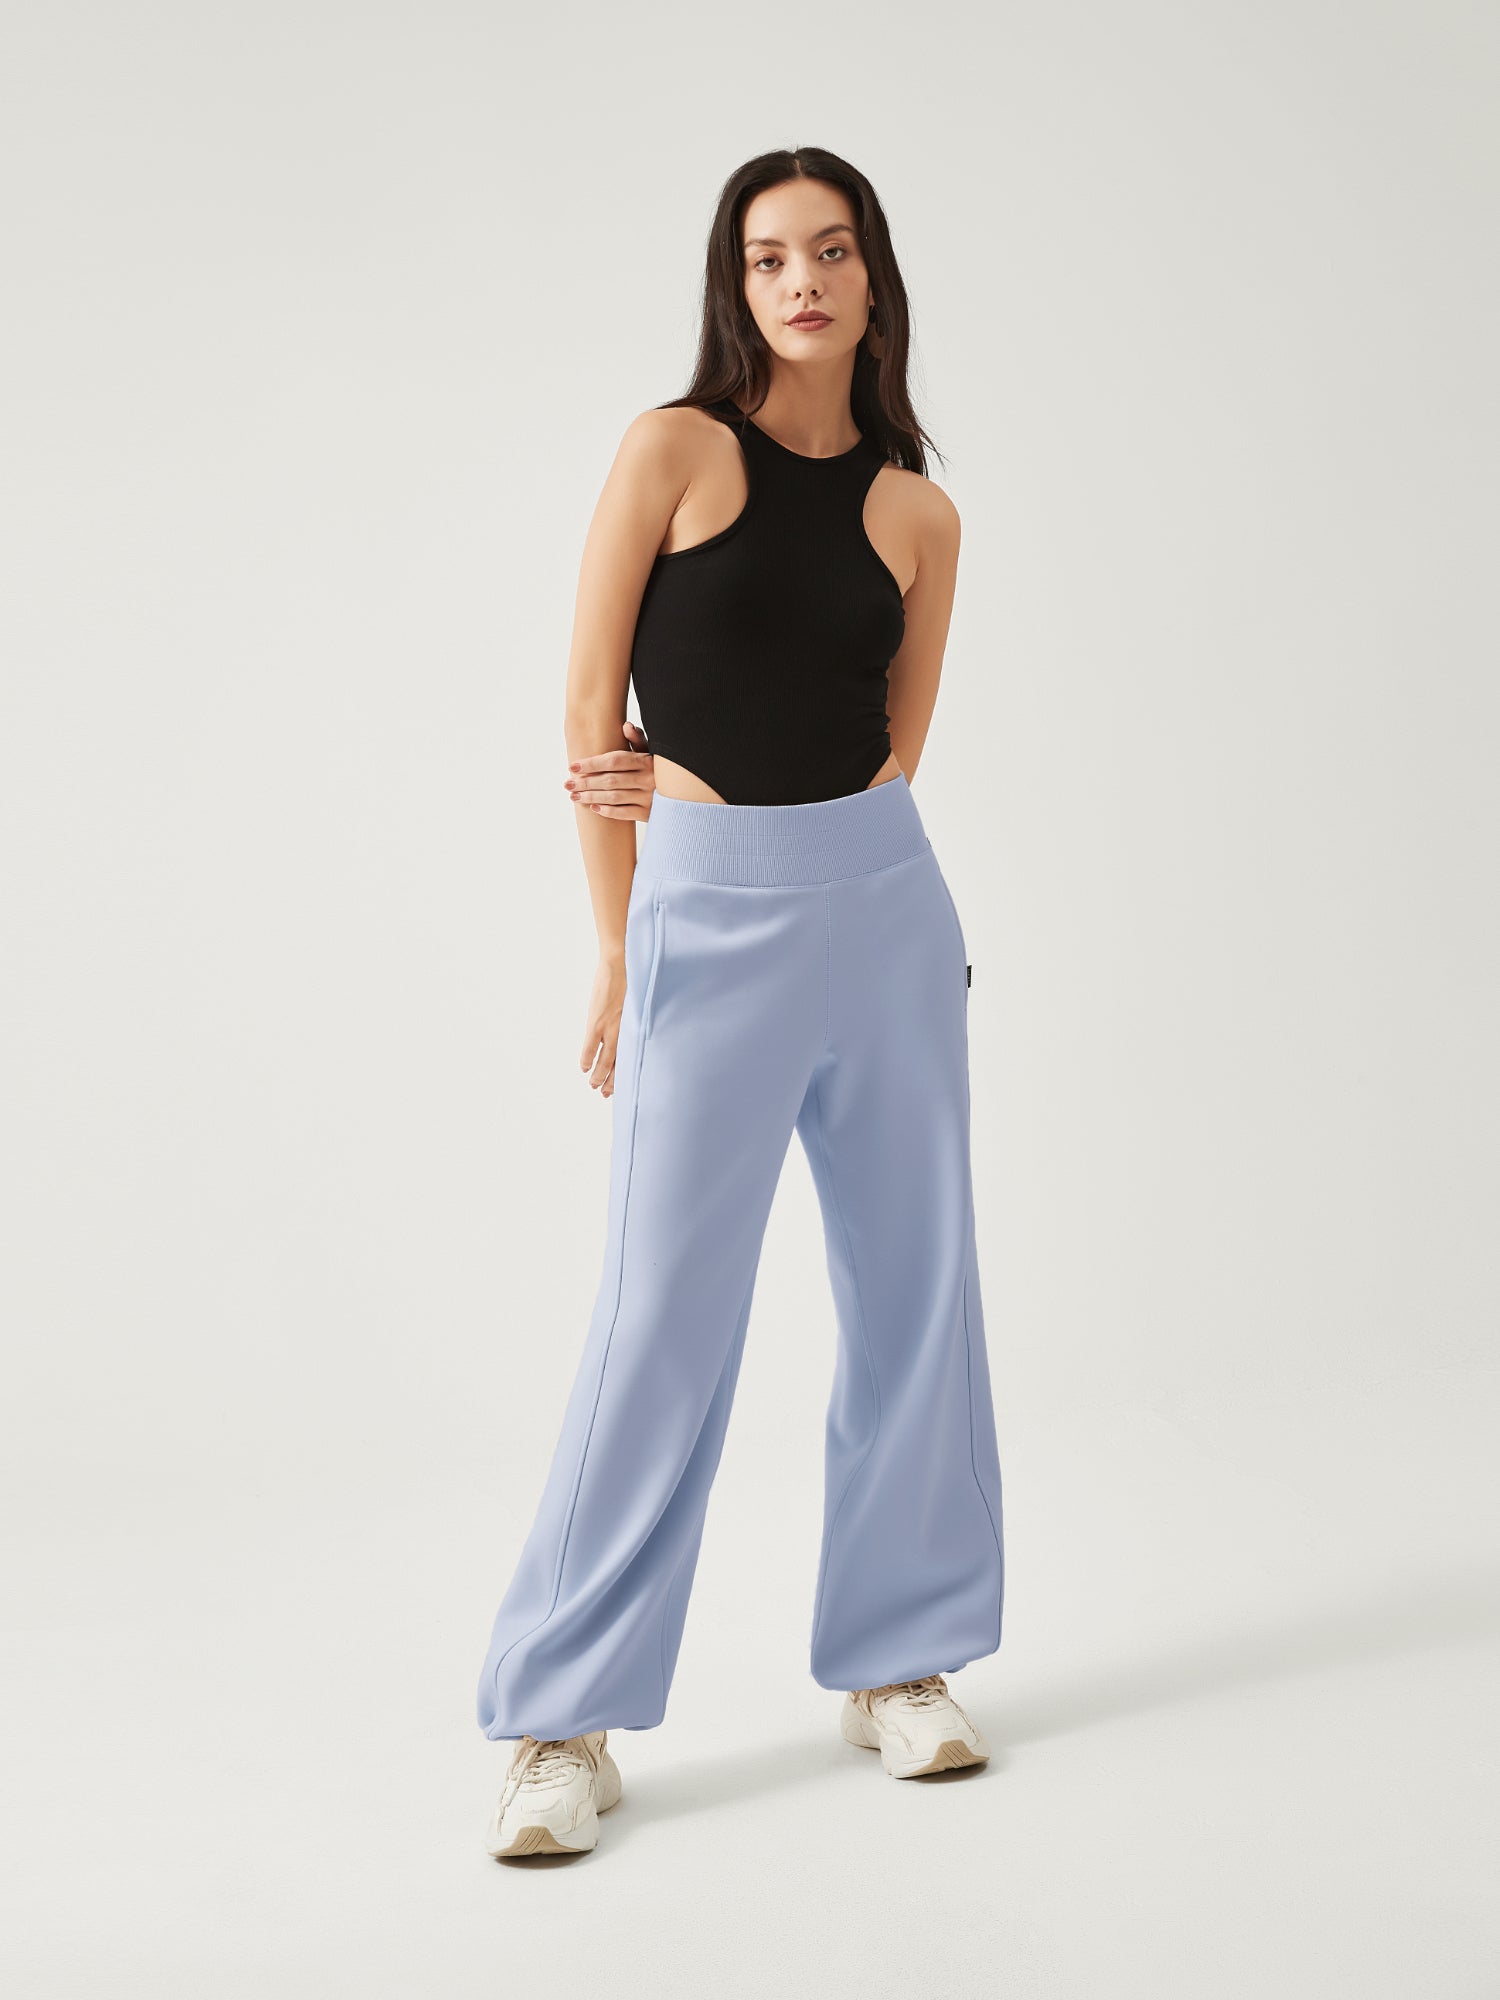 Cubby Sweatpants, Flared, High-Waisted Trendy Sweatpants